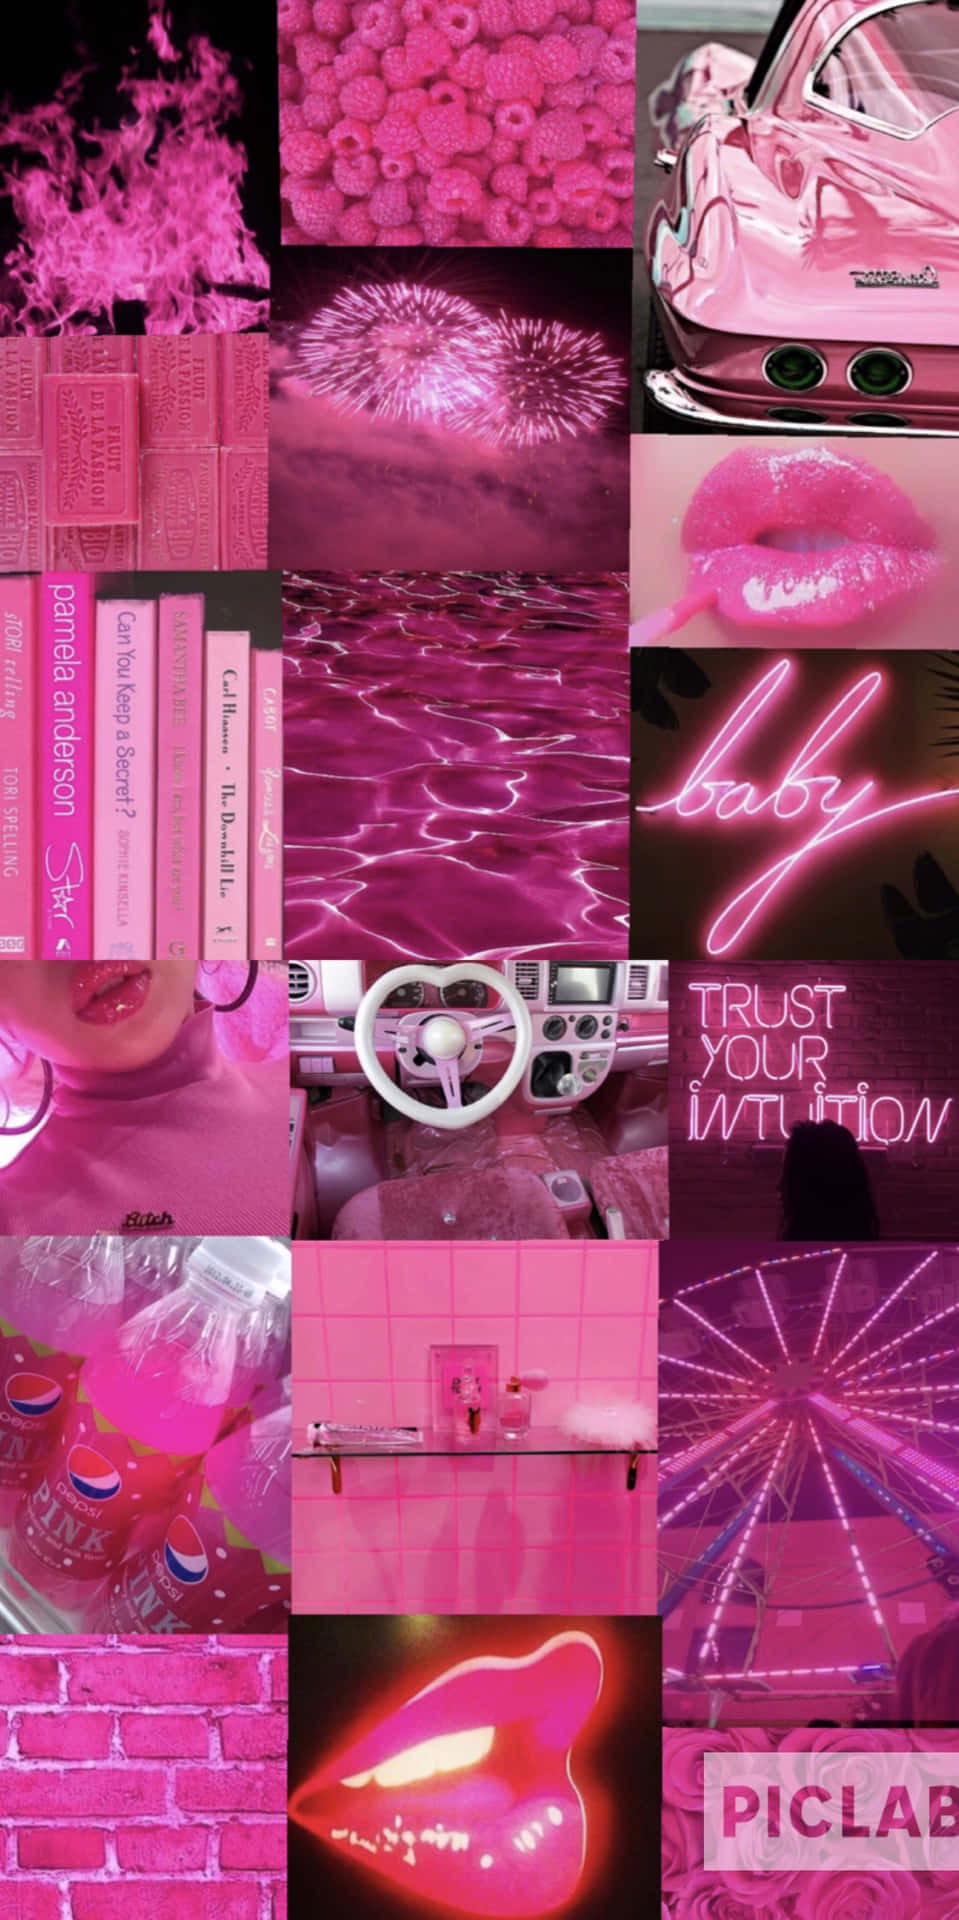 “The beauty of Aesthetic Pink is simply unparalleled.”